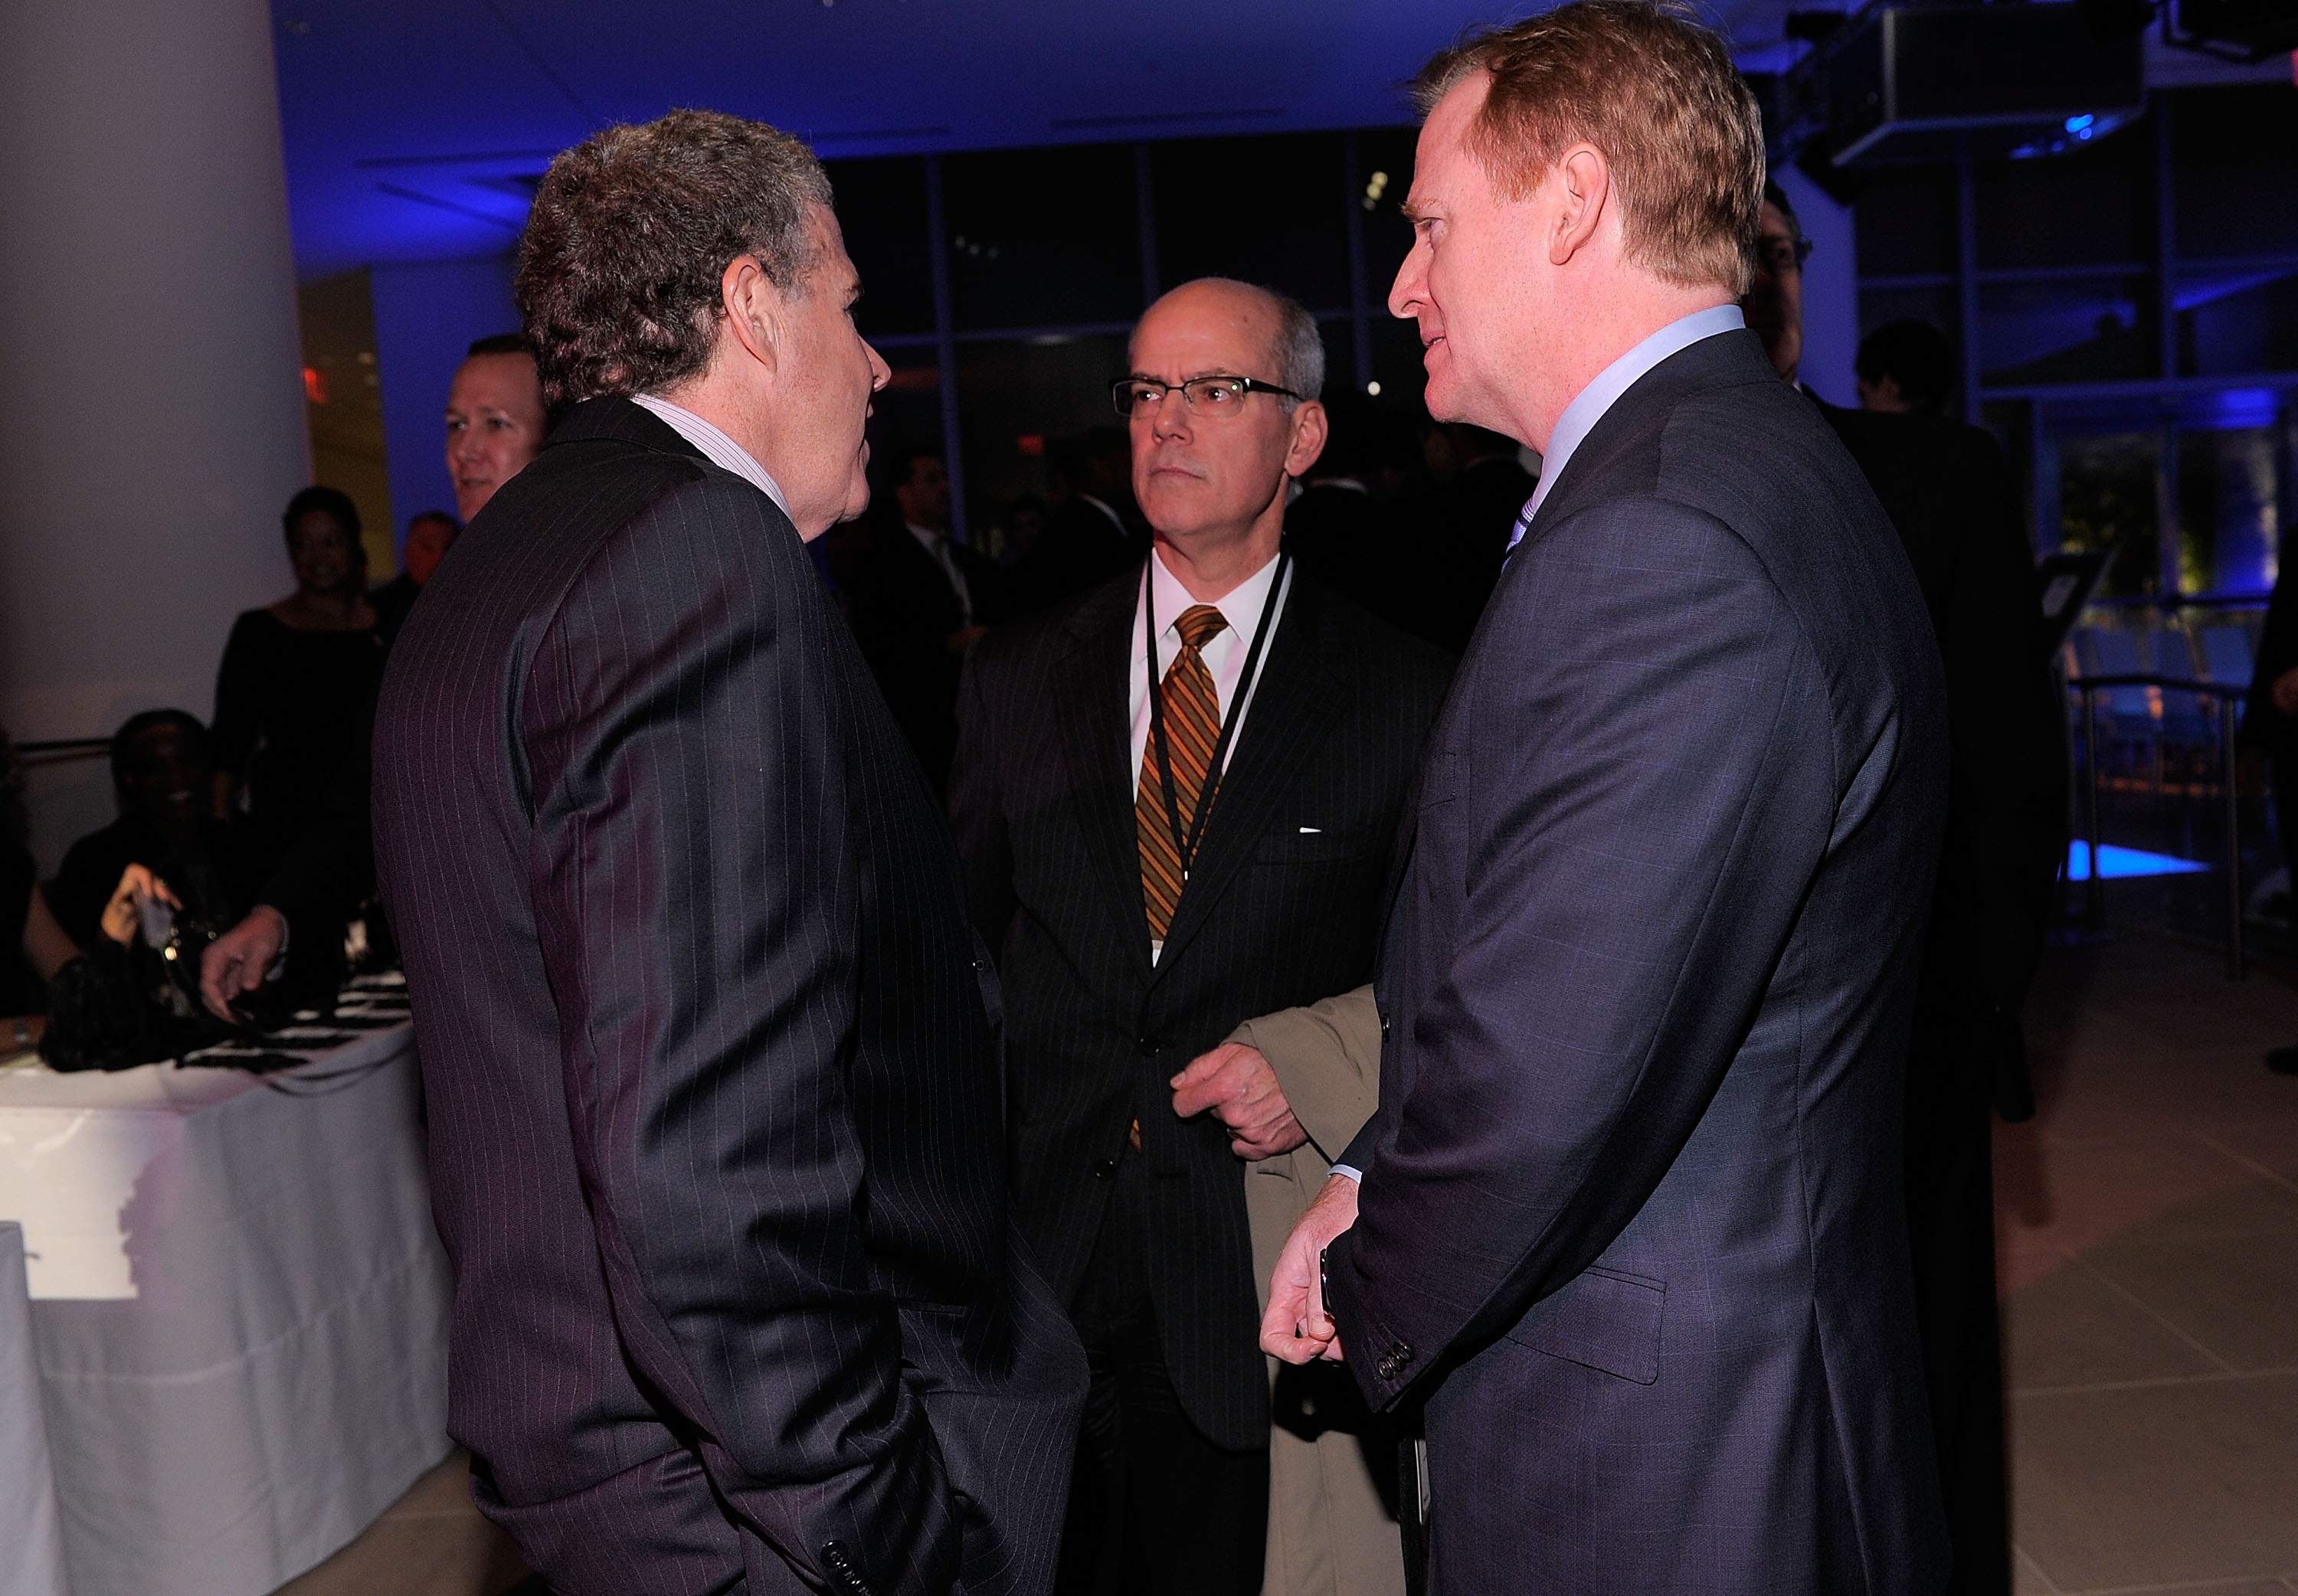 NEW YORK, NY - NOVEMBER 30:  (R) Commissioner of hte NFL Roger Goodell speaks during the 2010 Sports Illustrated Sportsman of the Year Celebration  at IAC Building on November 30, 2010 in New York City.  (Photo by Jemal Countess/Getty Images)